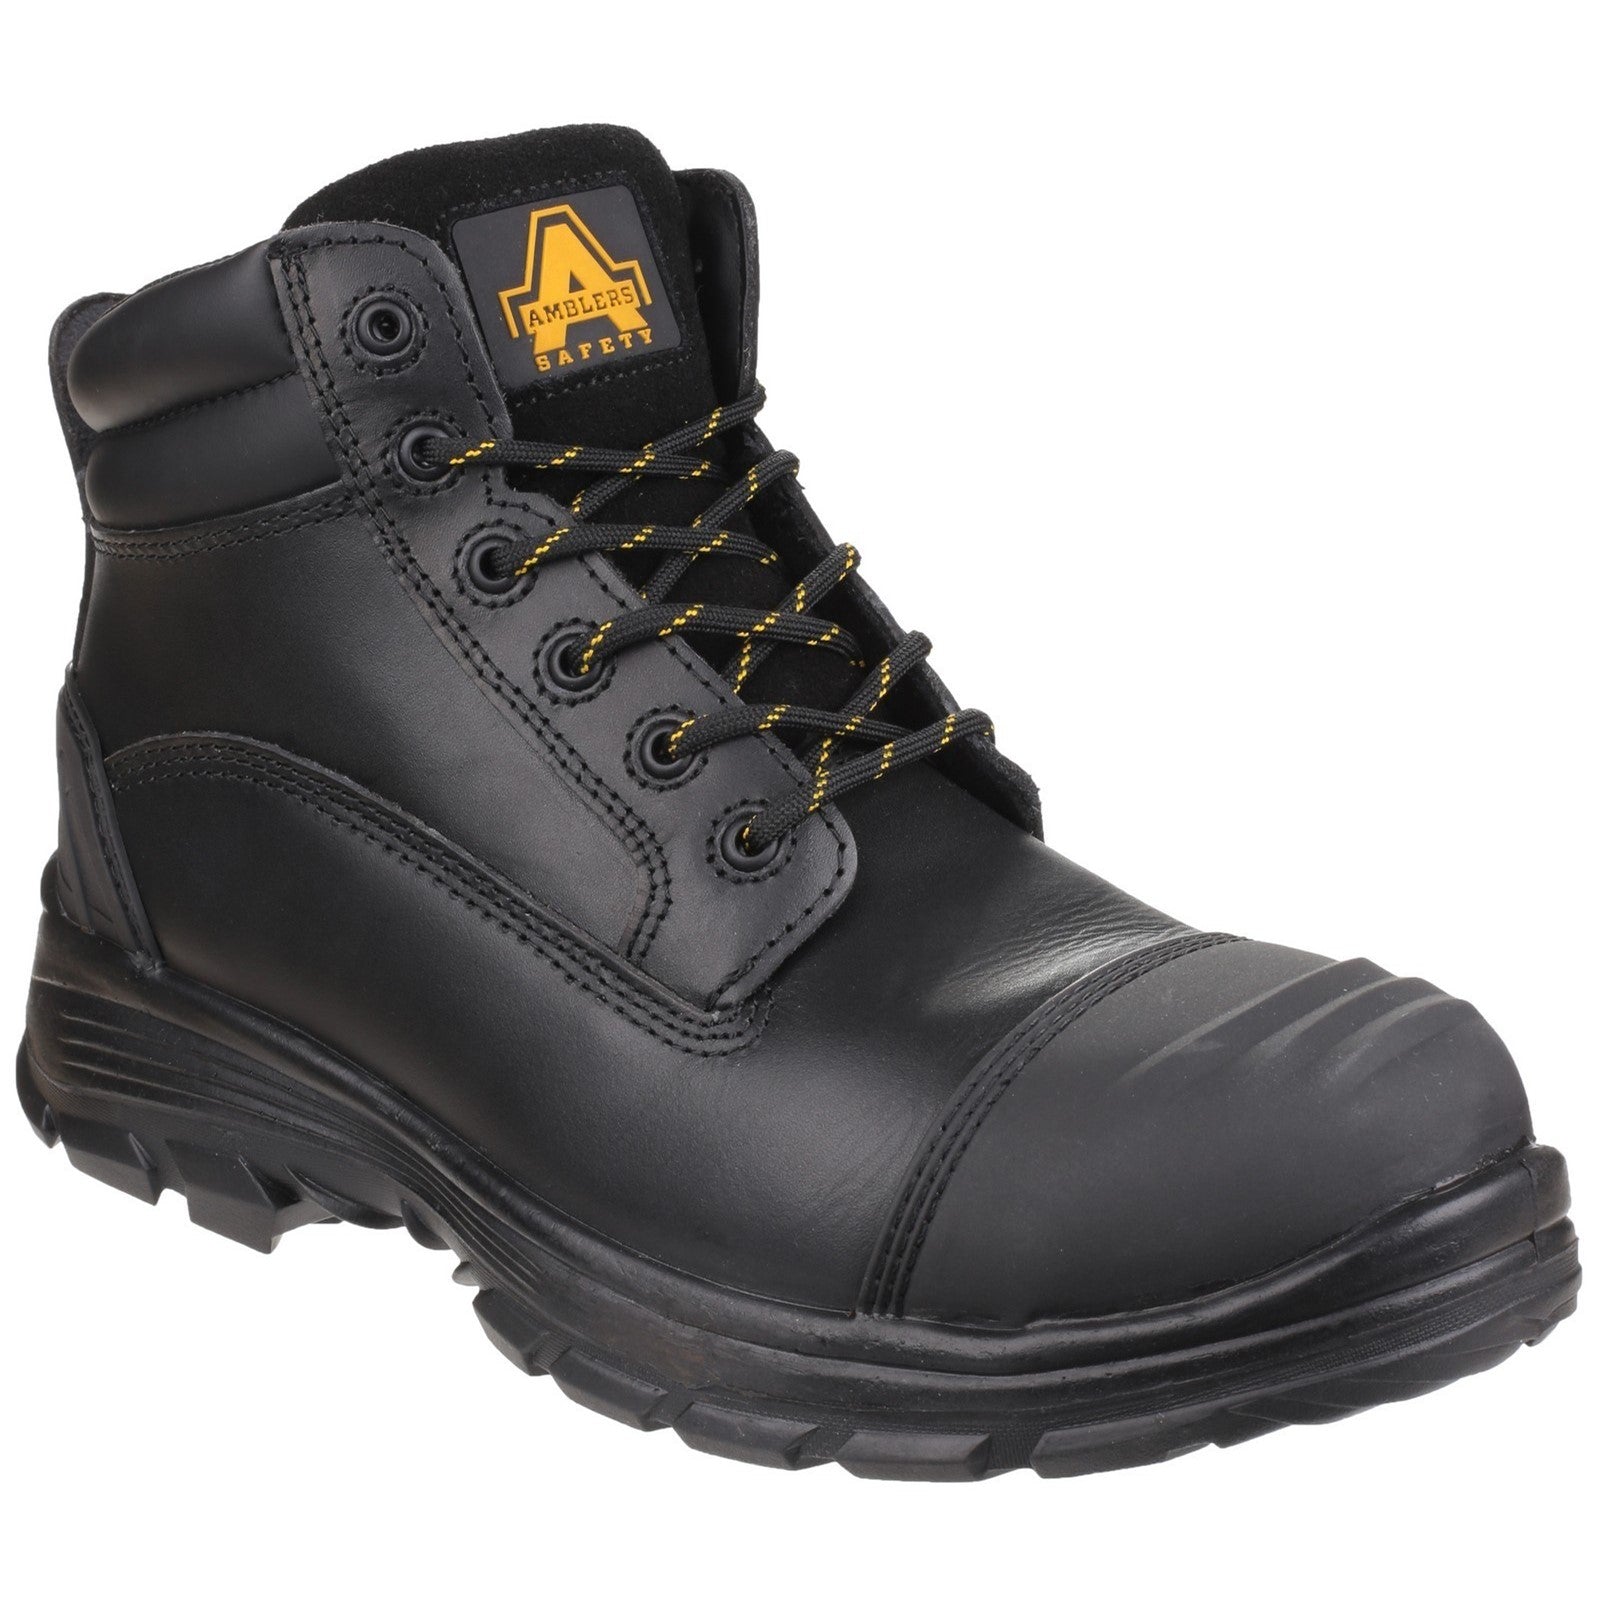 Amblers Safety AS201 QUANTOK S3 PU/RUBBER SAFETY BOOT